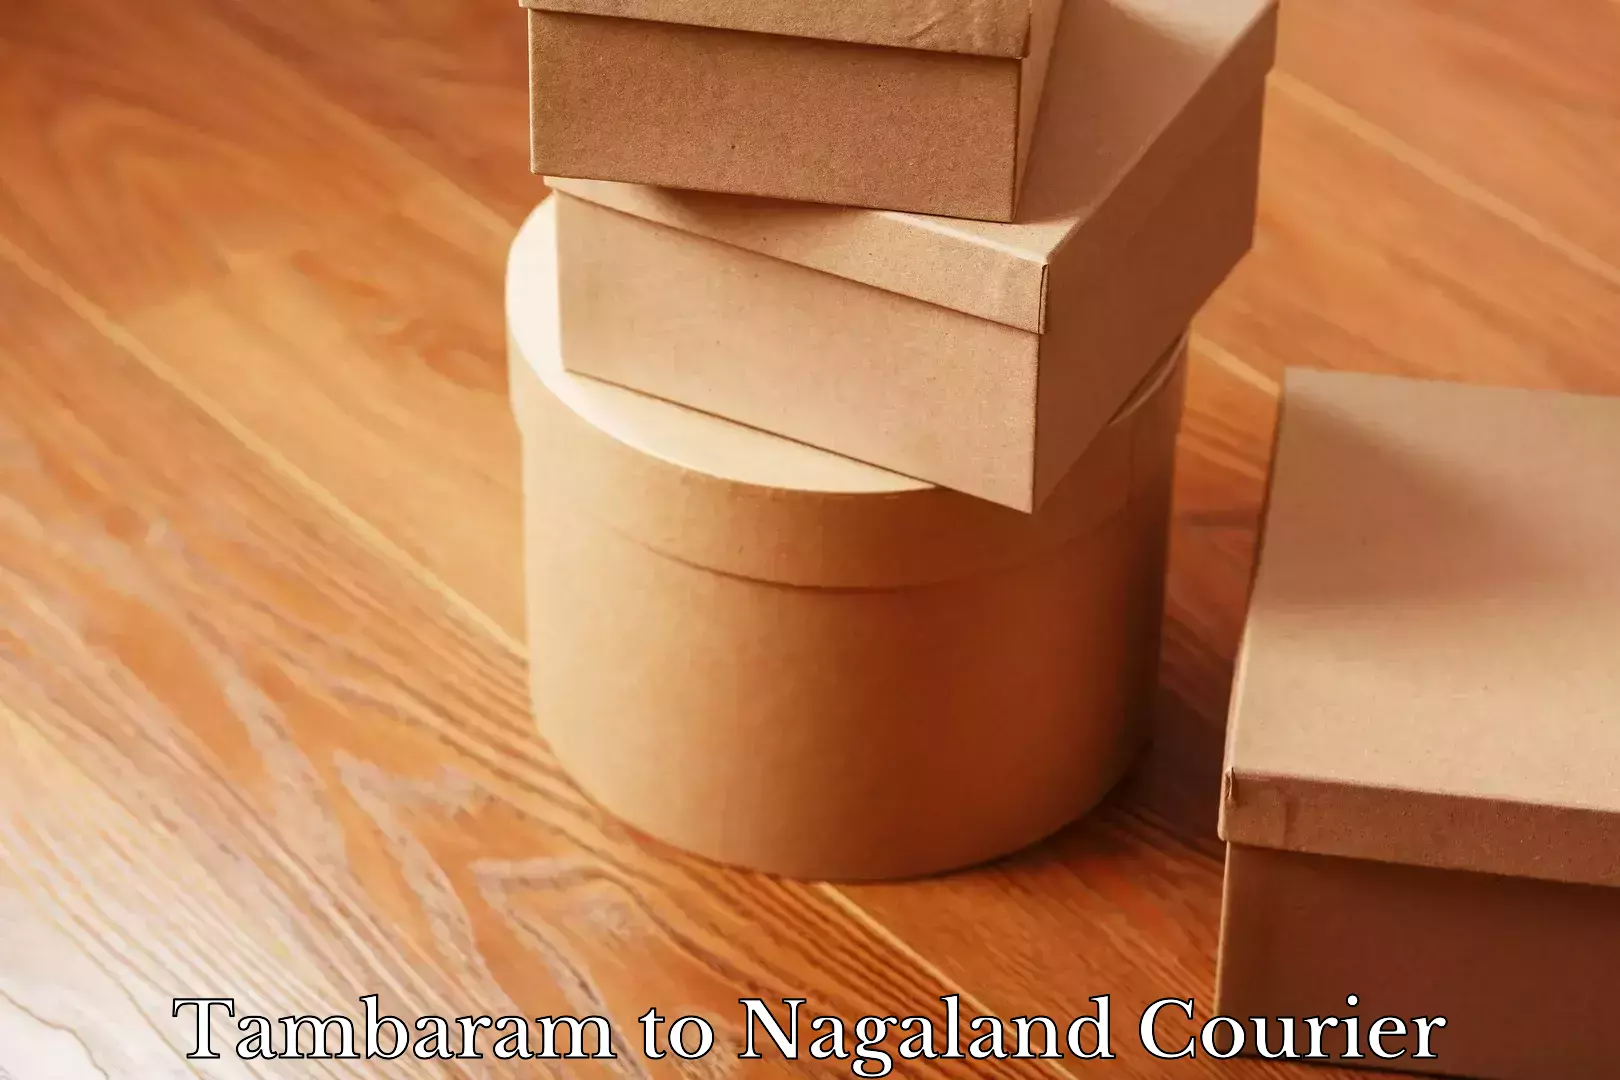 Expedited parcel delivery in Tambaram to Nagaland